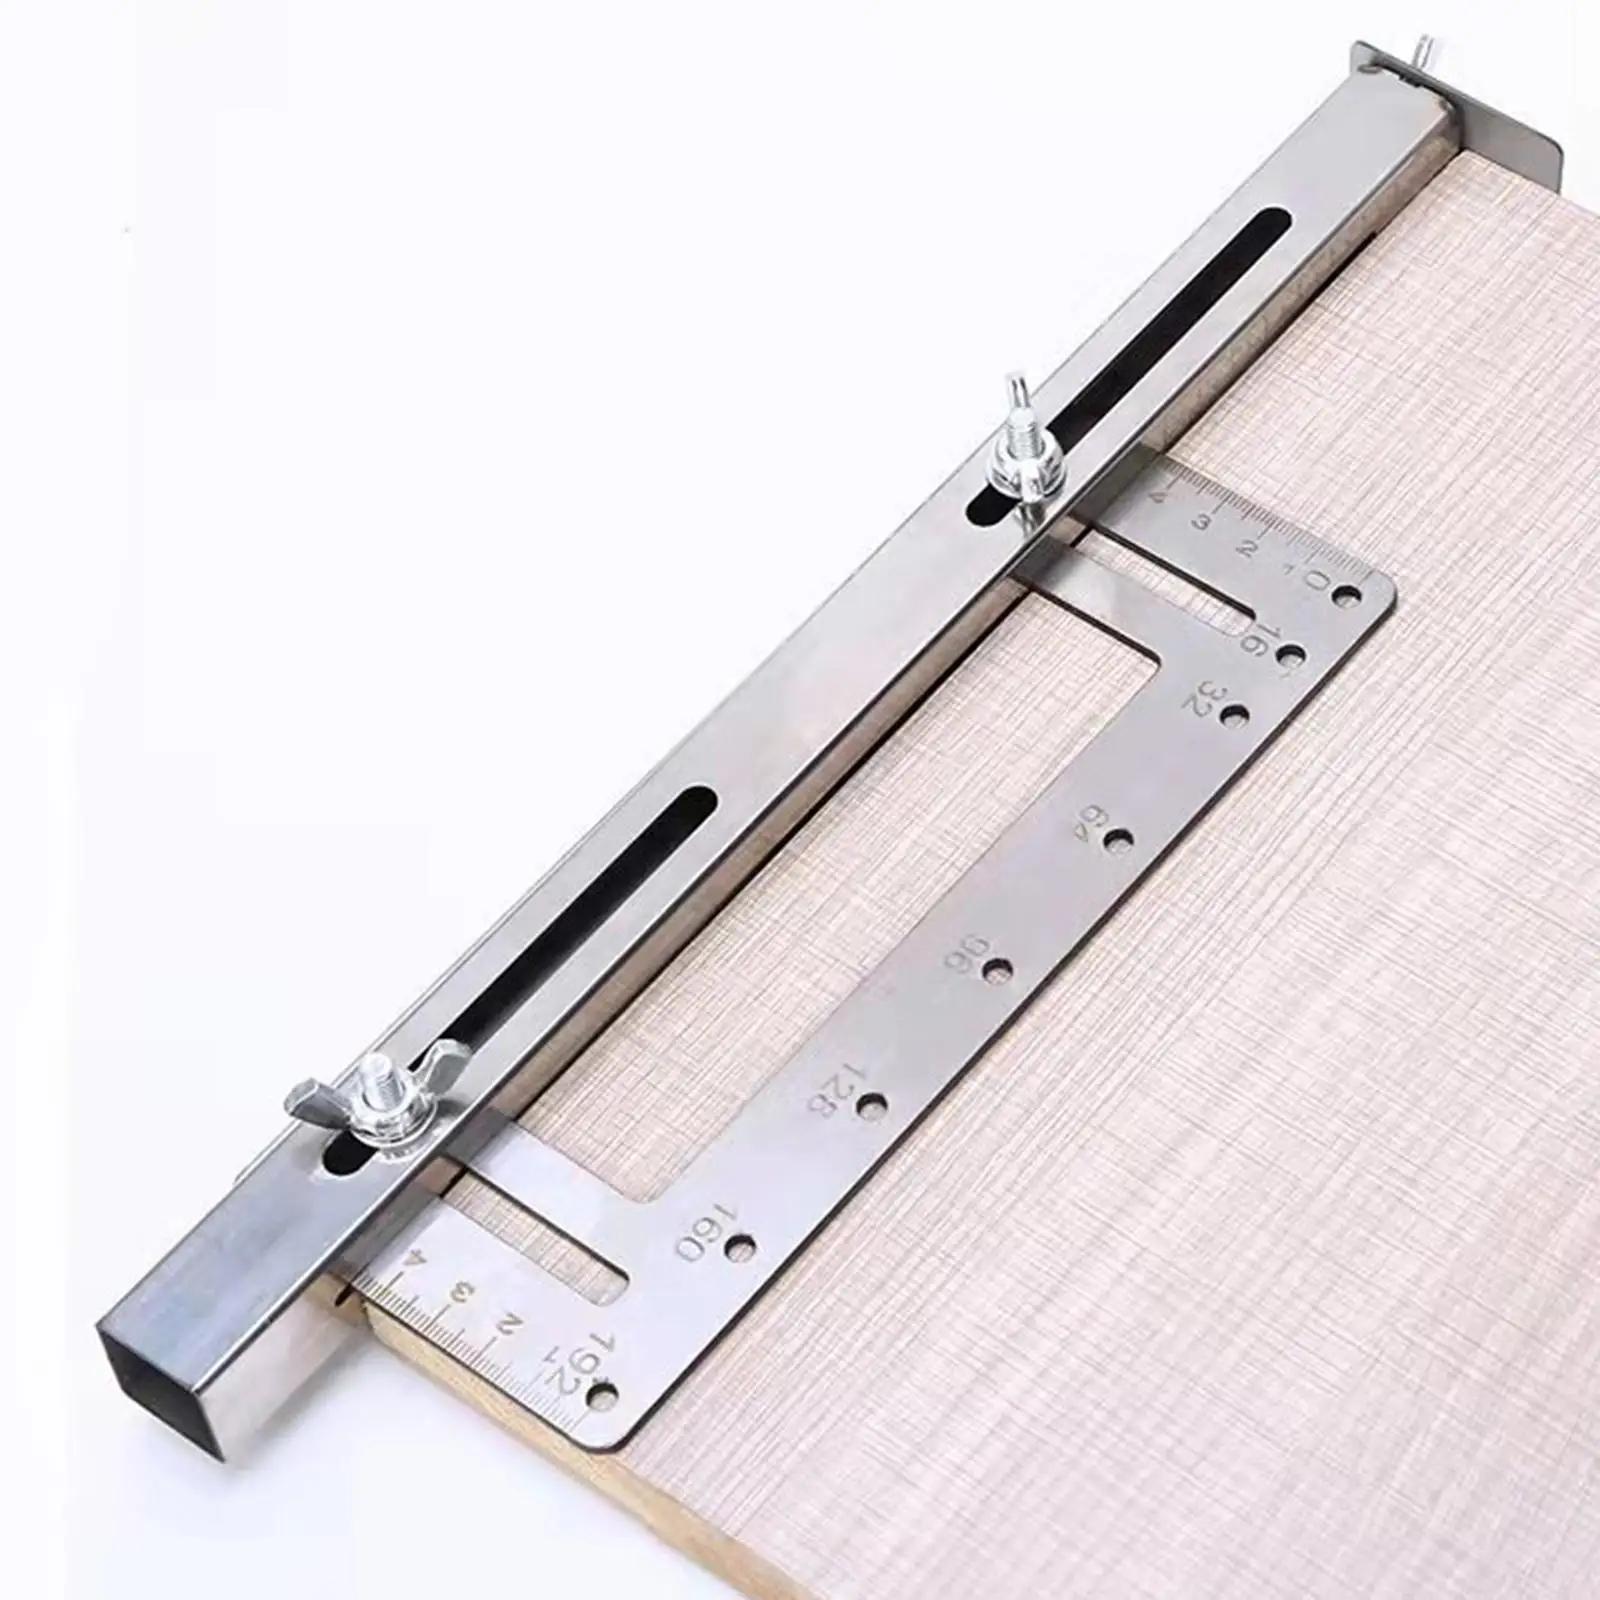 Cabinet Drill   Locator Jig, Hardware Template Tool Woodworking Tools